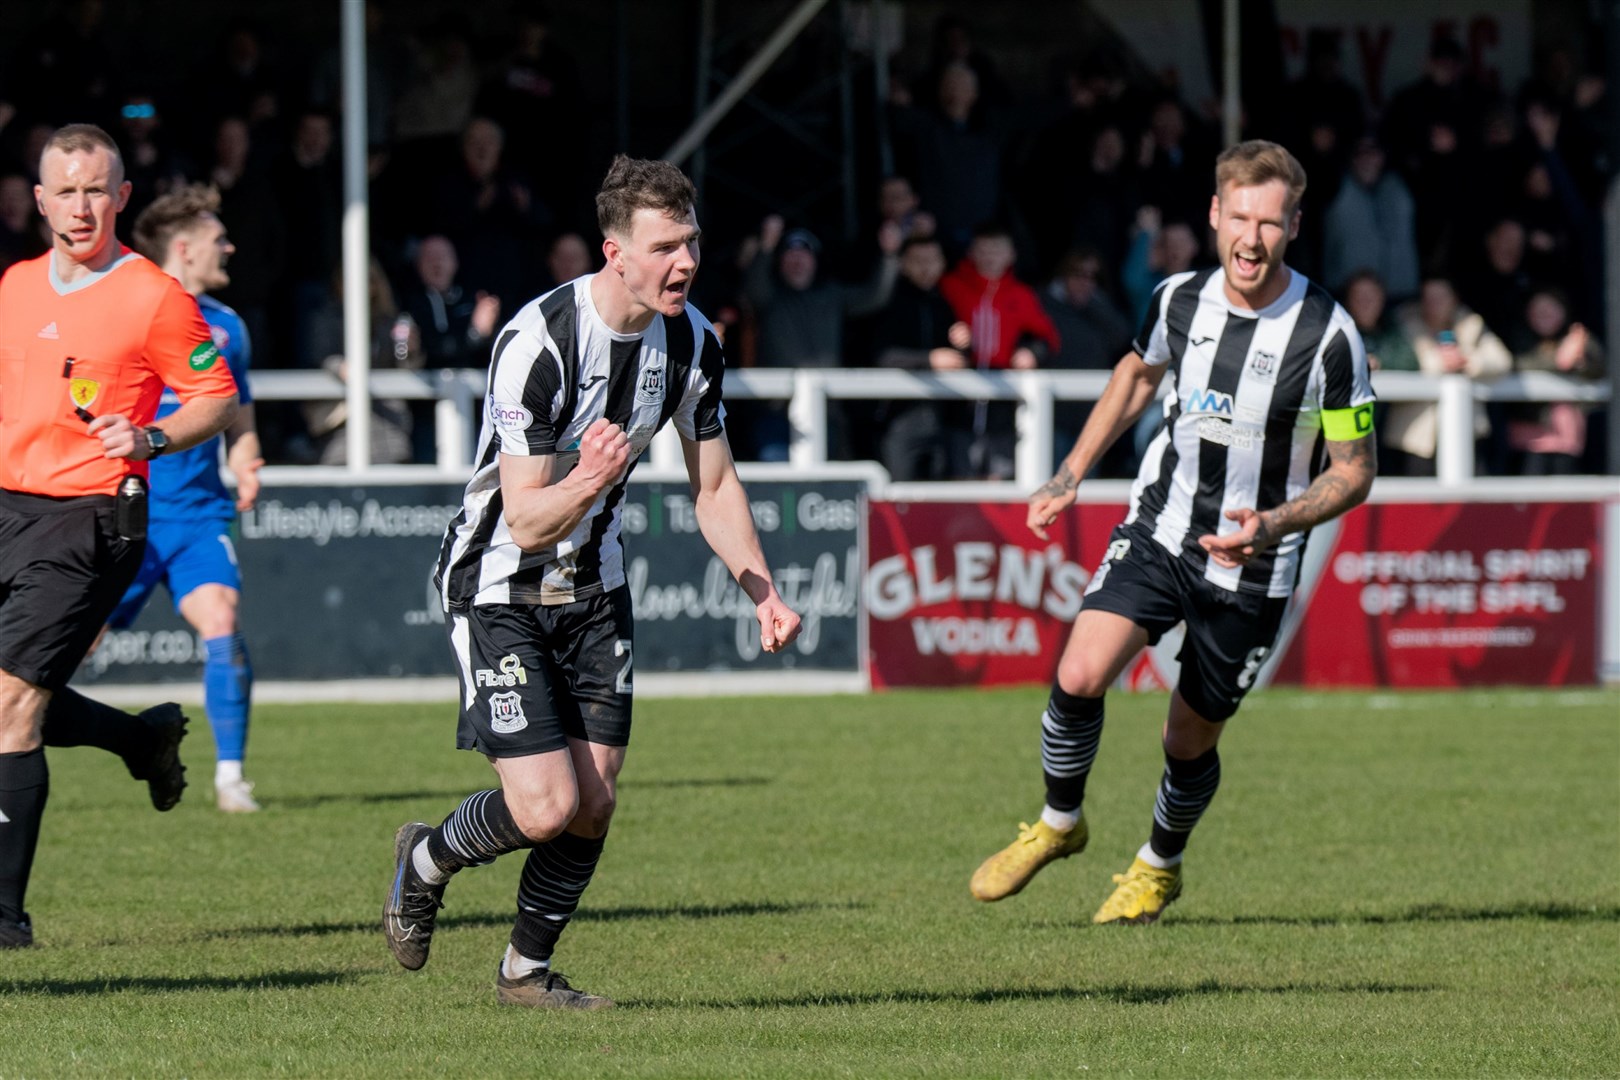 Ryan Macleman puts Elgin ahead with a great second half strike. Elgin City FC (2) vs The Spartans (2) - SPFL League Two 23/24 - Borough Briggs, Elgin 06/04/24.Picture: Daniel Forsyth.